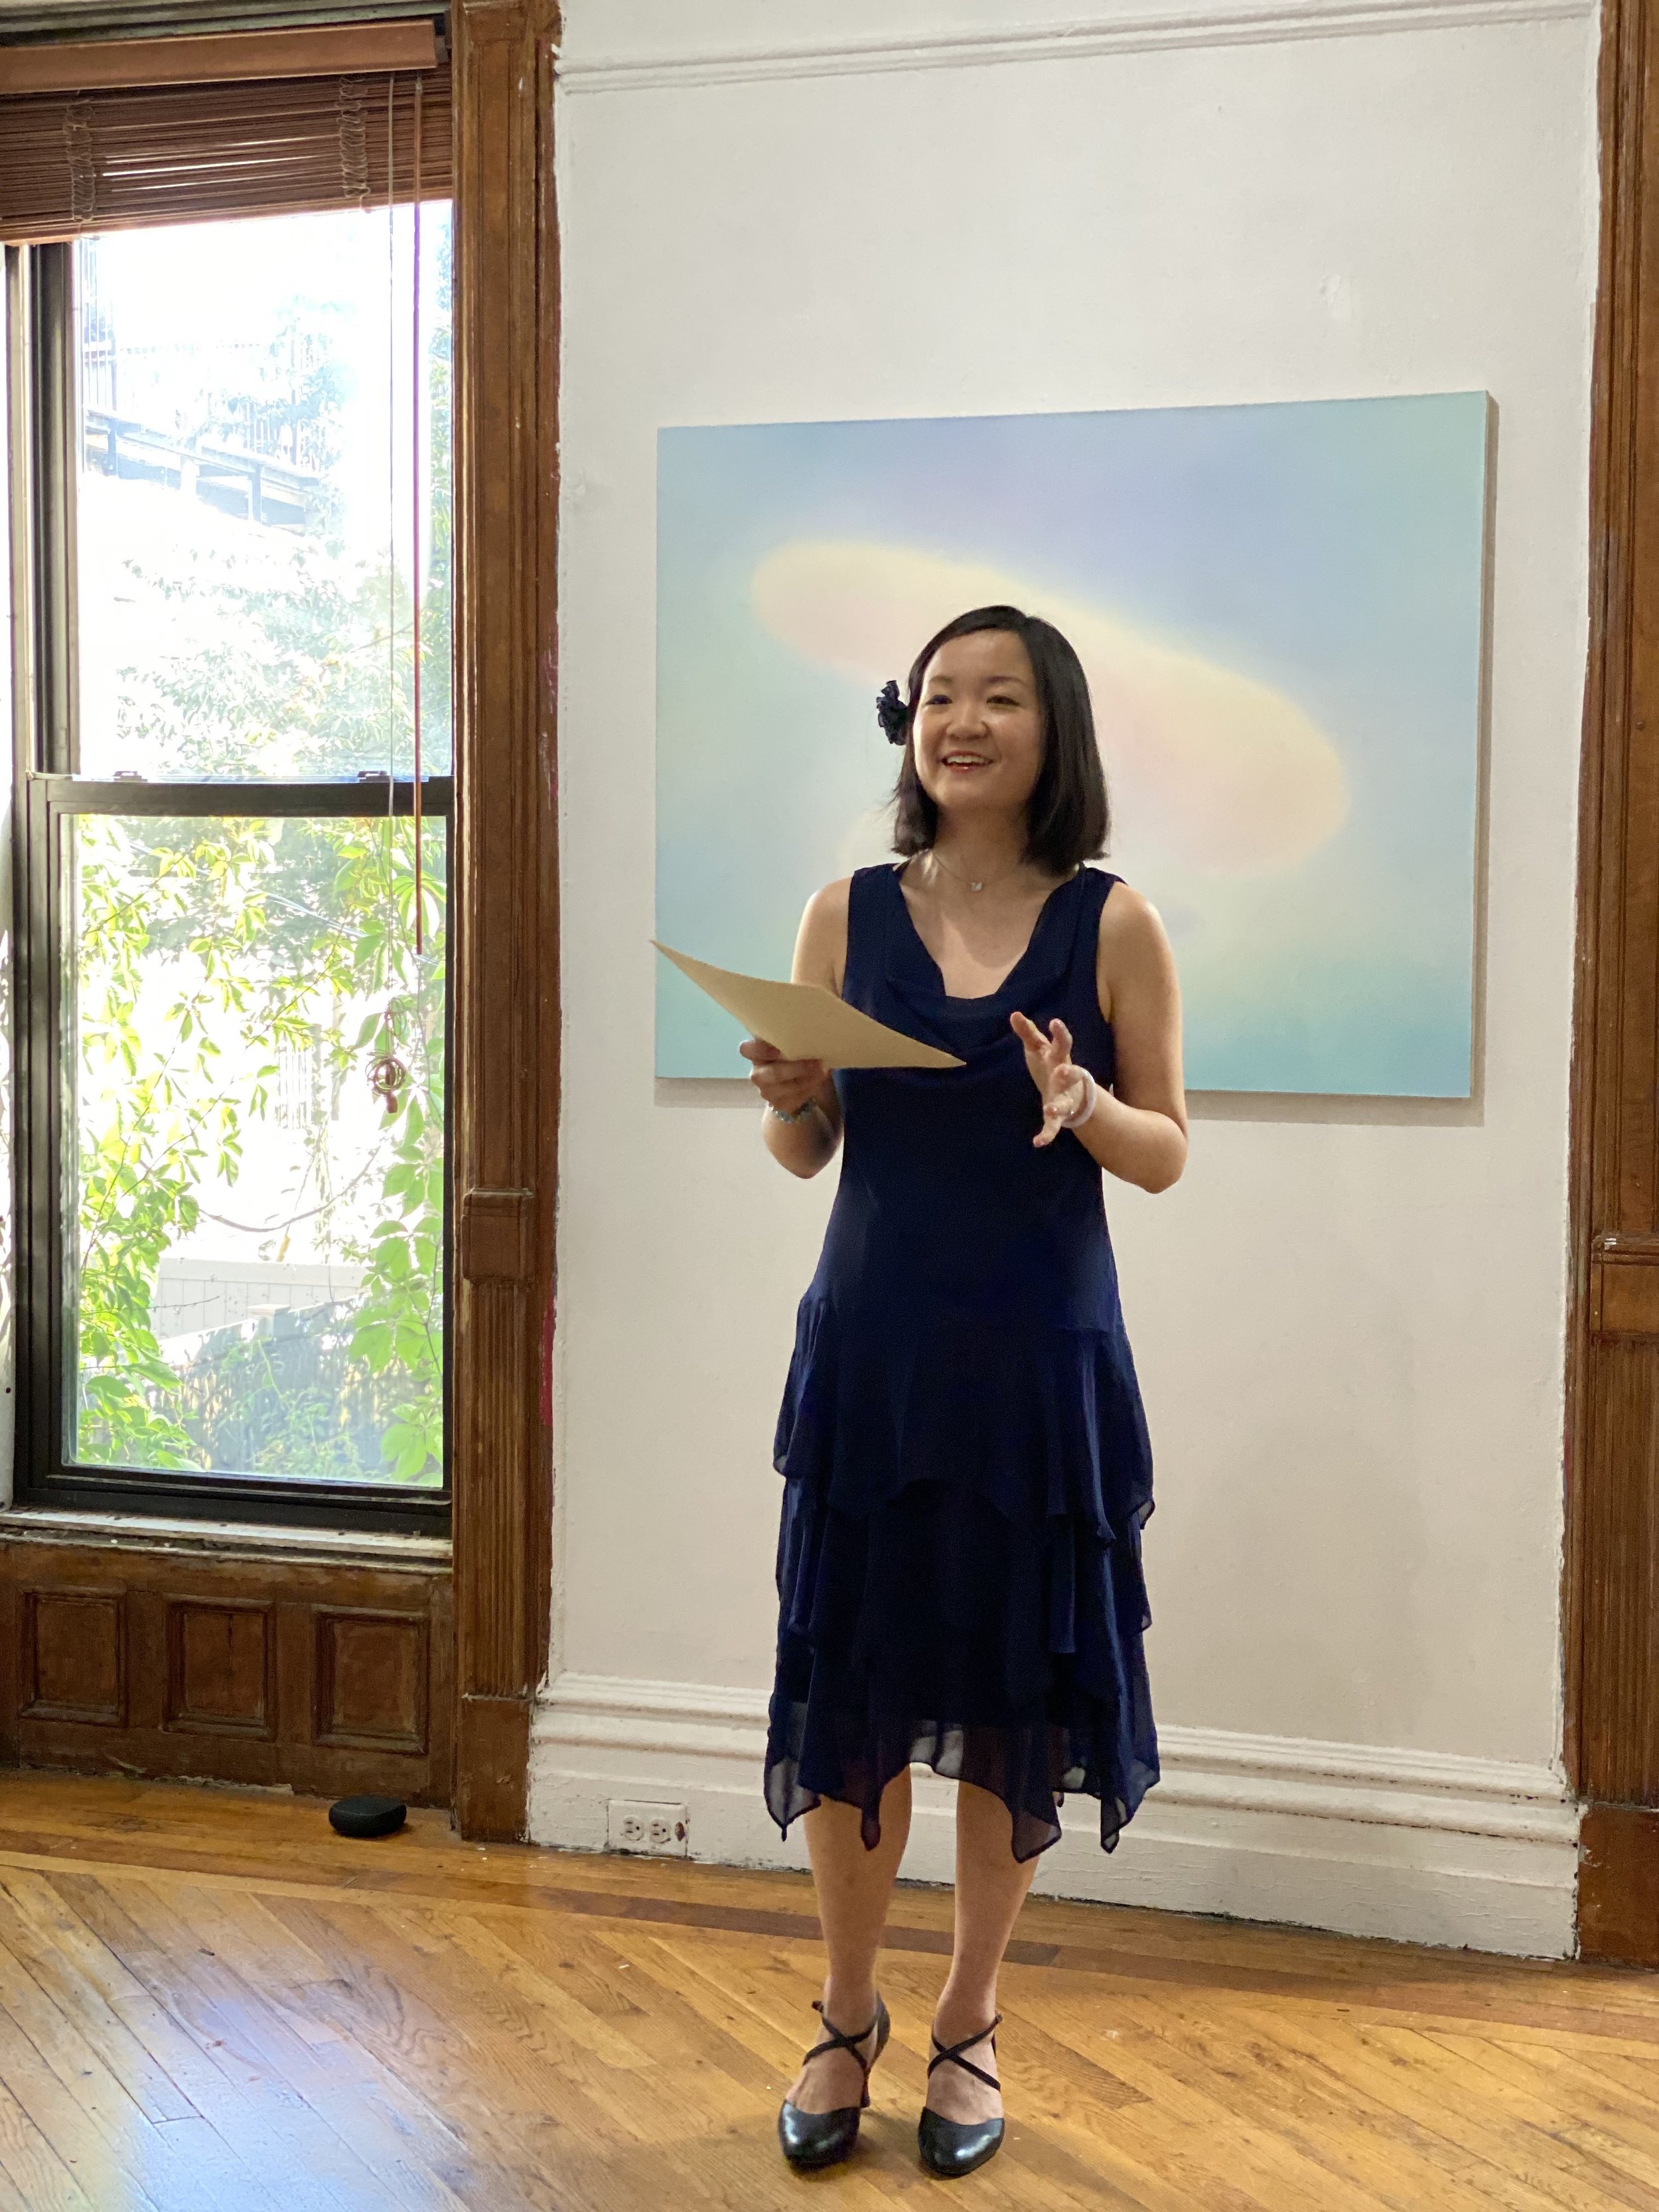  Classical Voice Performance on September 10th, 2020. Photo by Barbara Song, courtesy of Fou Gallery  